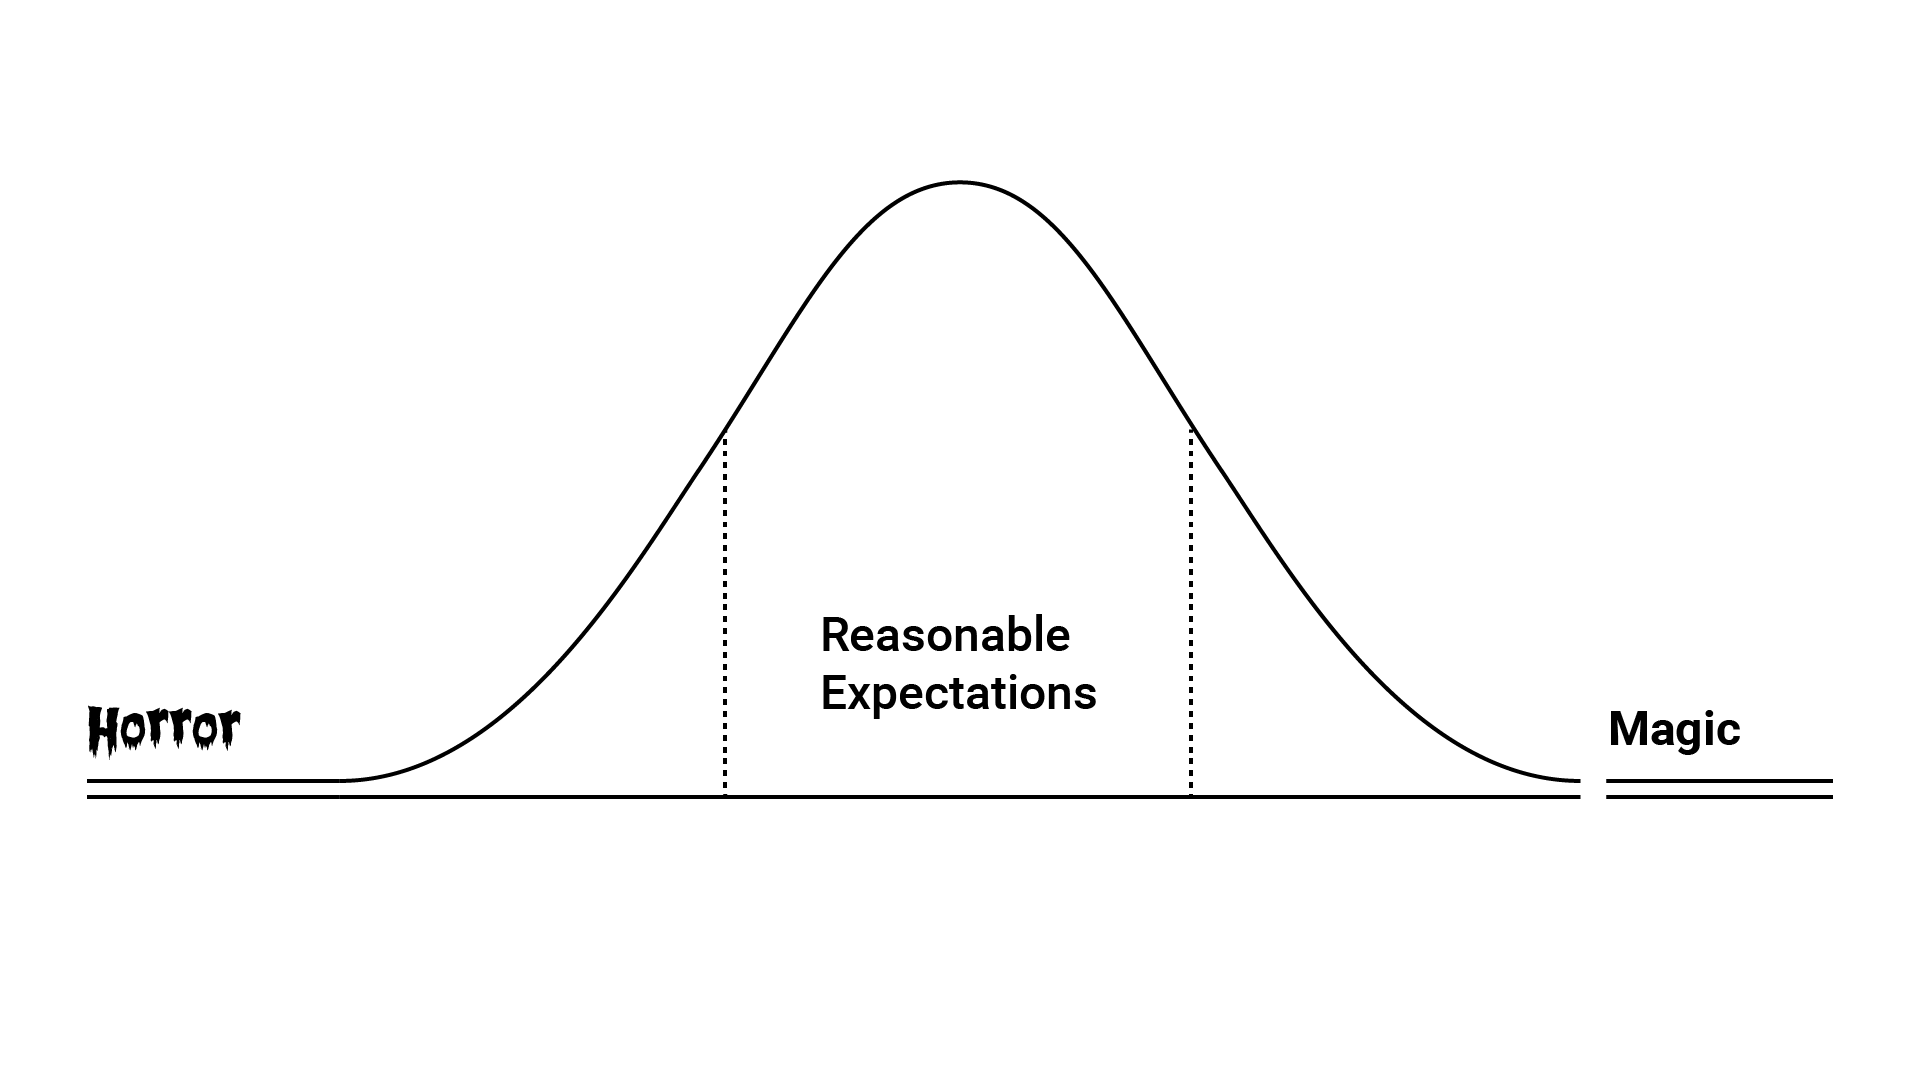 A bell curve labeled with "horror" at the left side, "reasonable expectations" in the middle area, and "magic" at the right side.